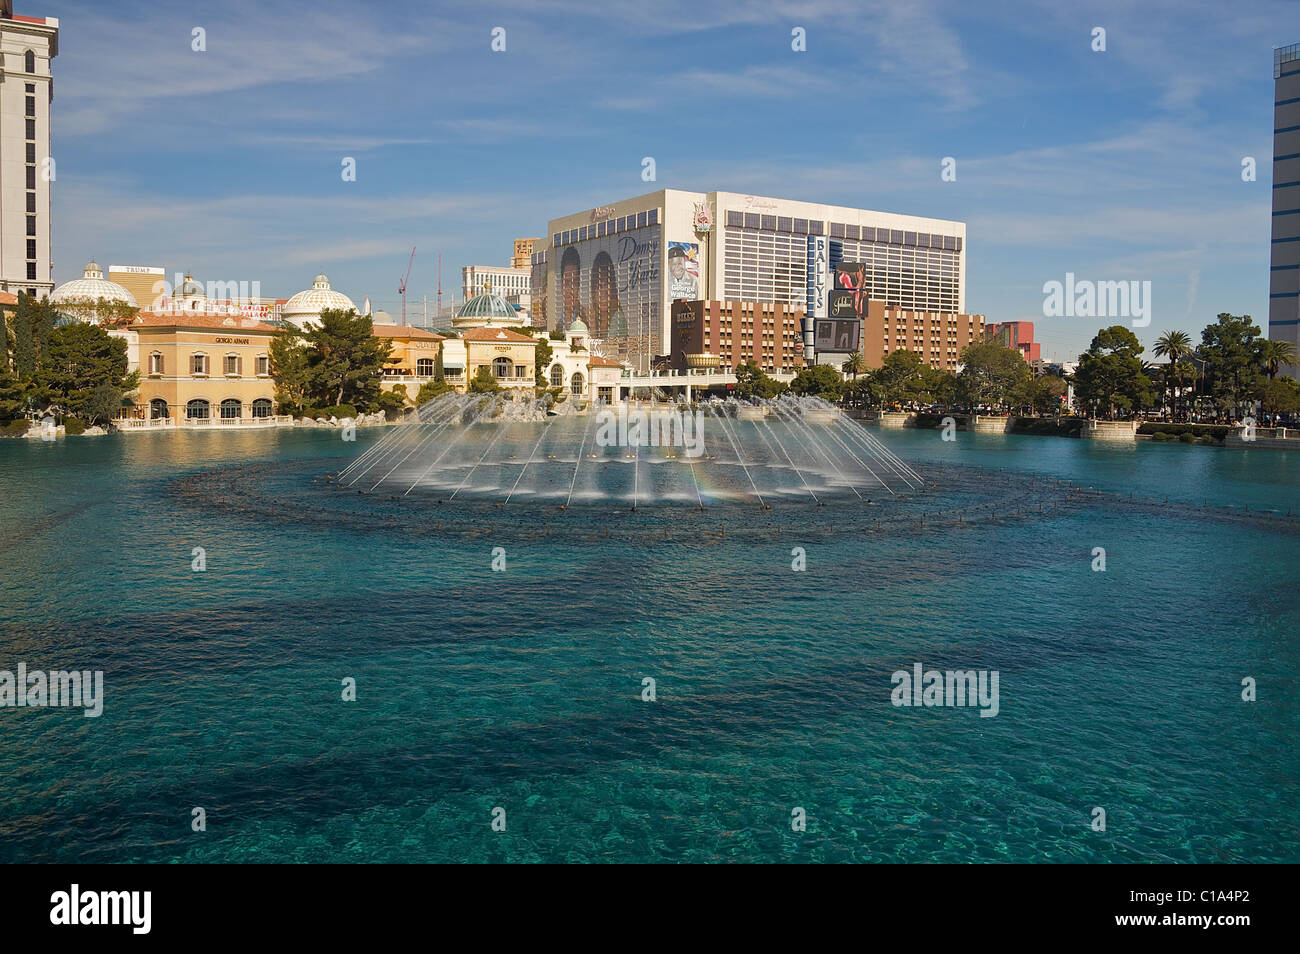 The Bellagio Fountains in Las Vegas, Flamingo Hotel and Bill's Gamblin' Hall in the background Stock Photo